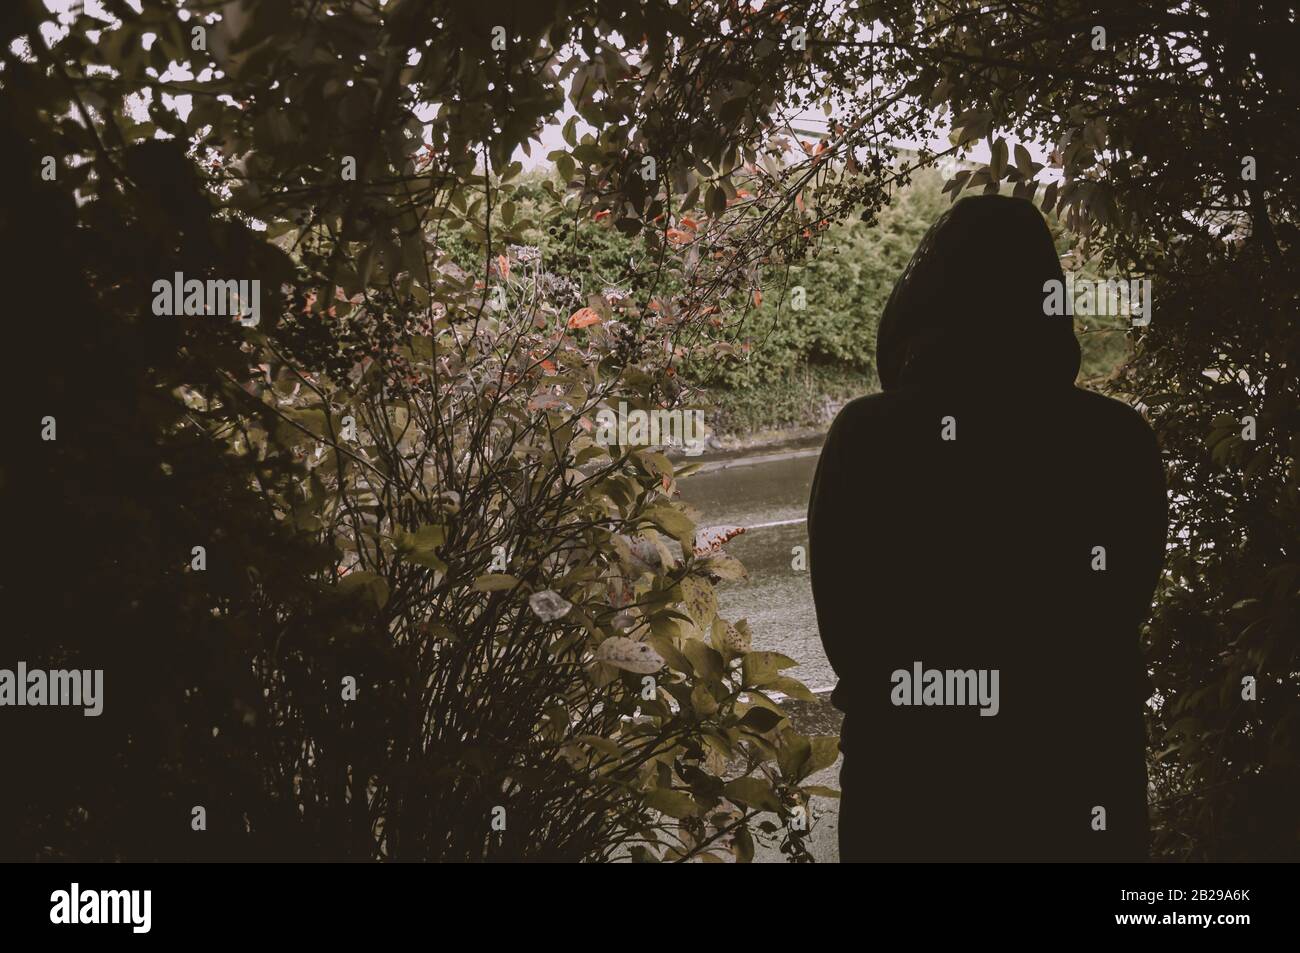 Desaturated atmospheric image of a silhouette of a lone person, wearing  a hoody, standing in an opening in trees. Stock Photo